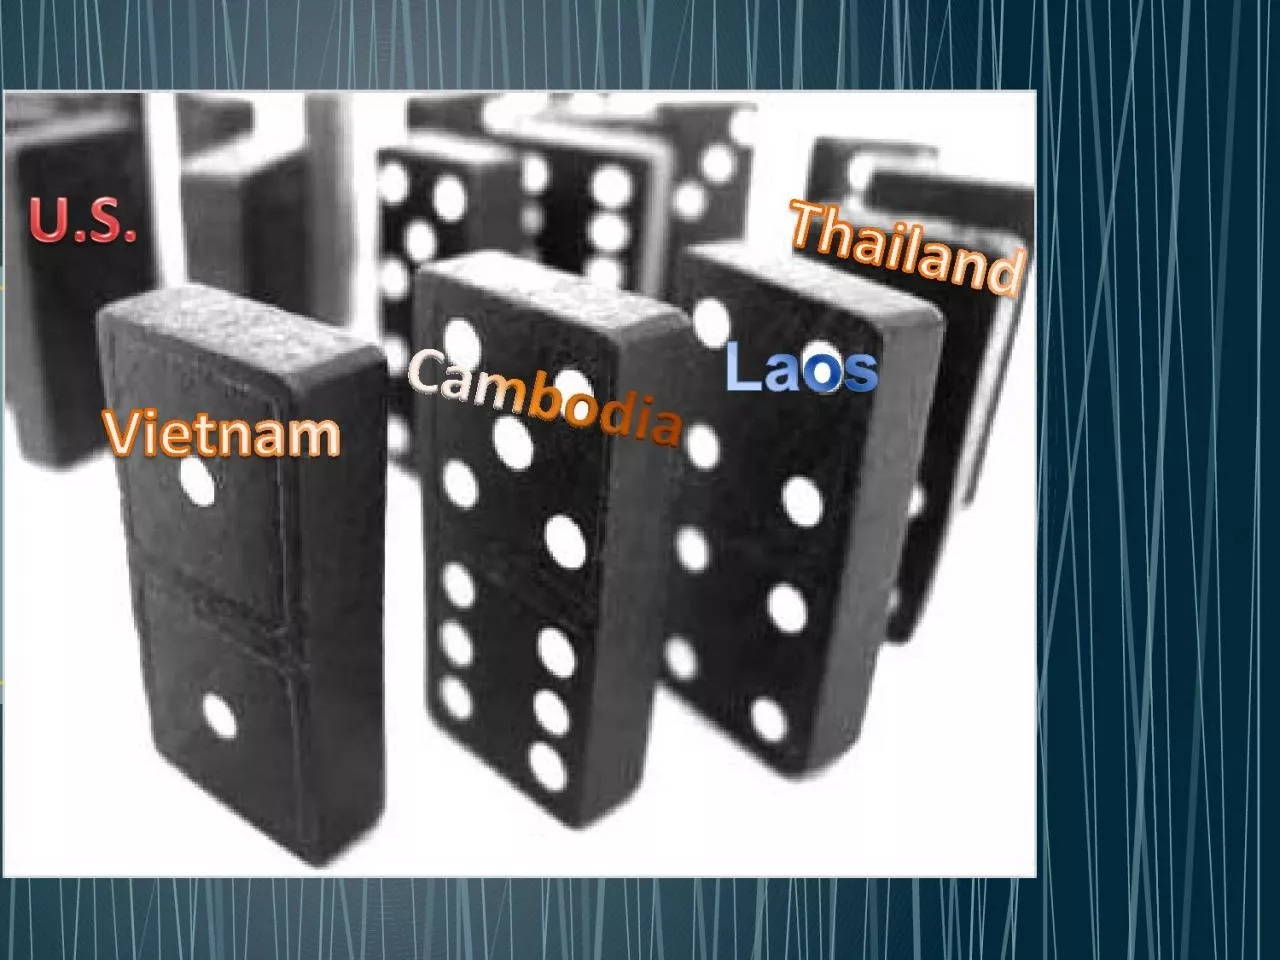 Domino Theory- idea that if Vietnam fell to communism then surrounding countries would